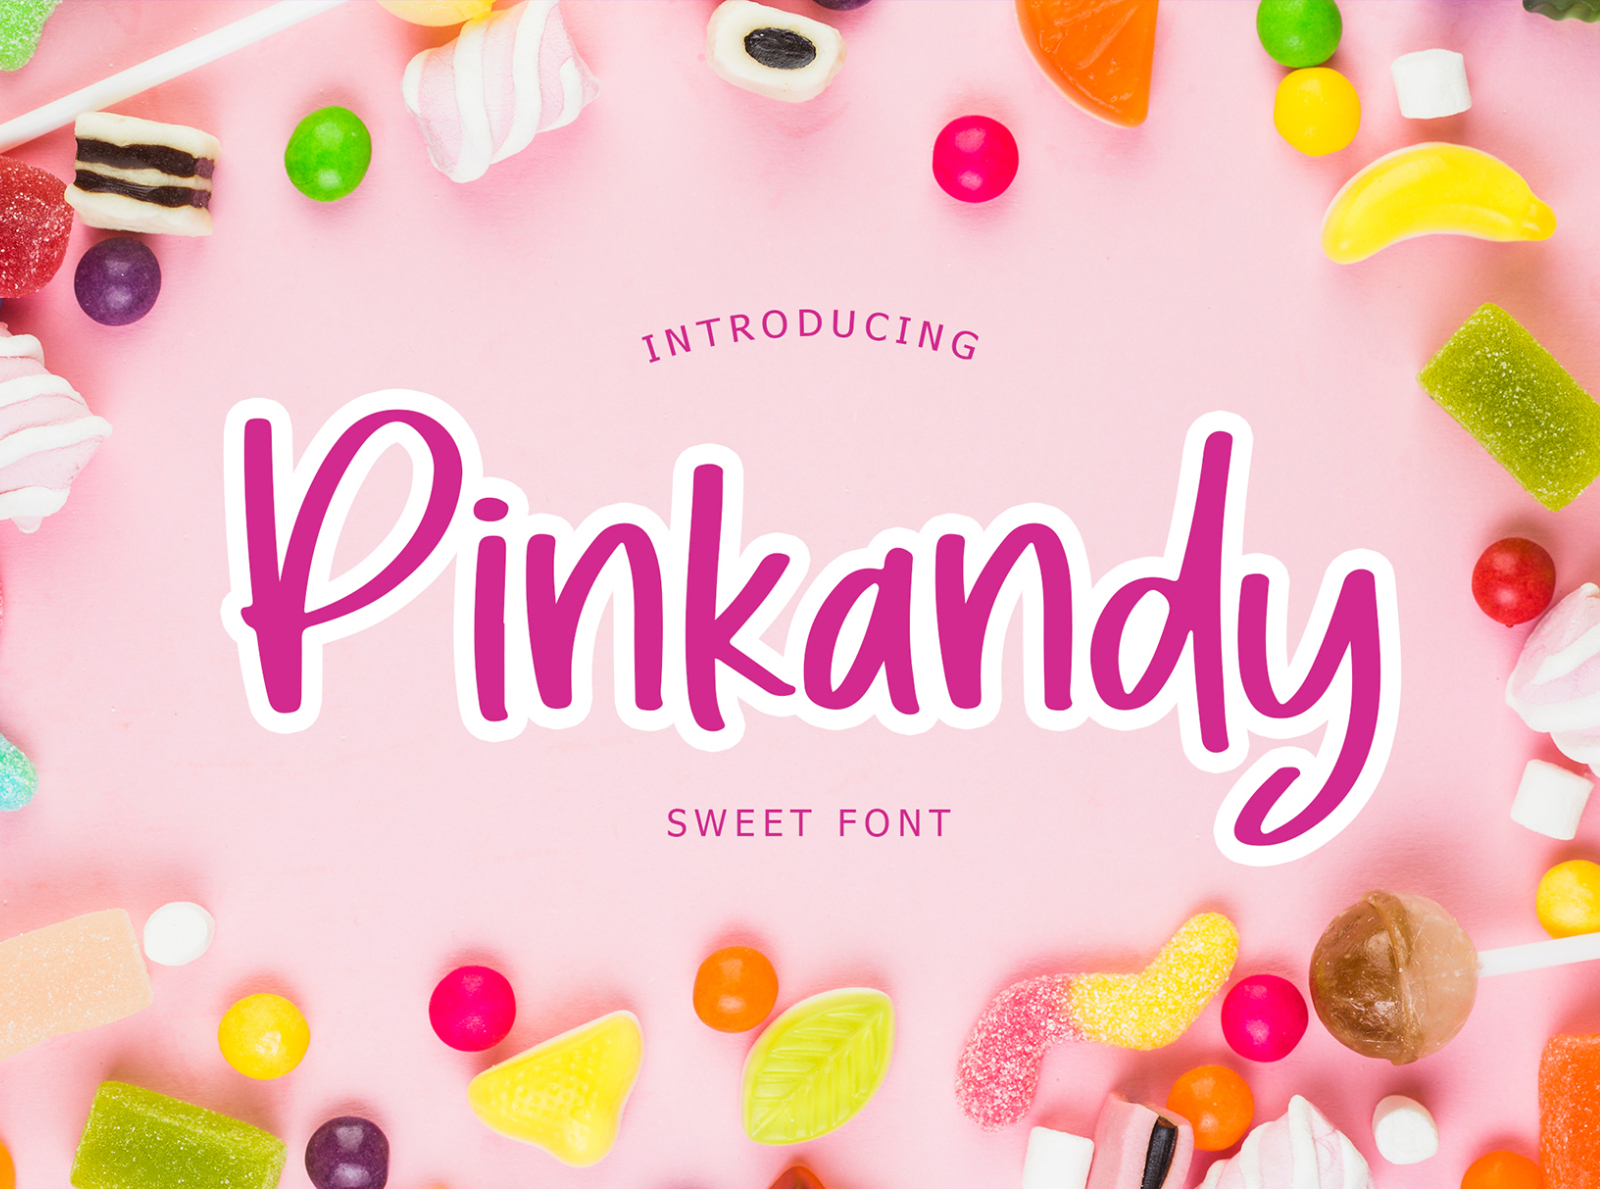 Pinkandy Sweet Kids Display Font designed by Giant Design. 